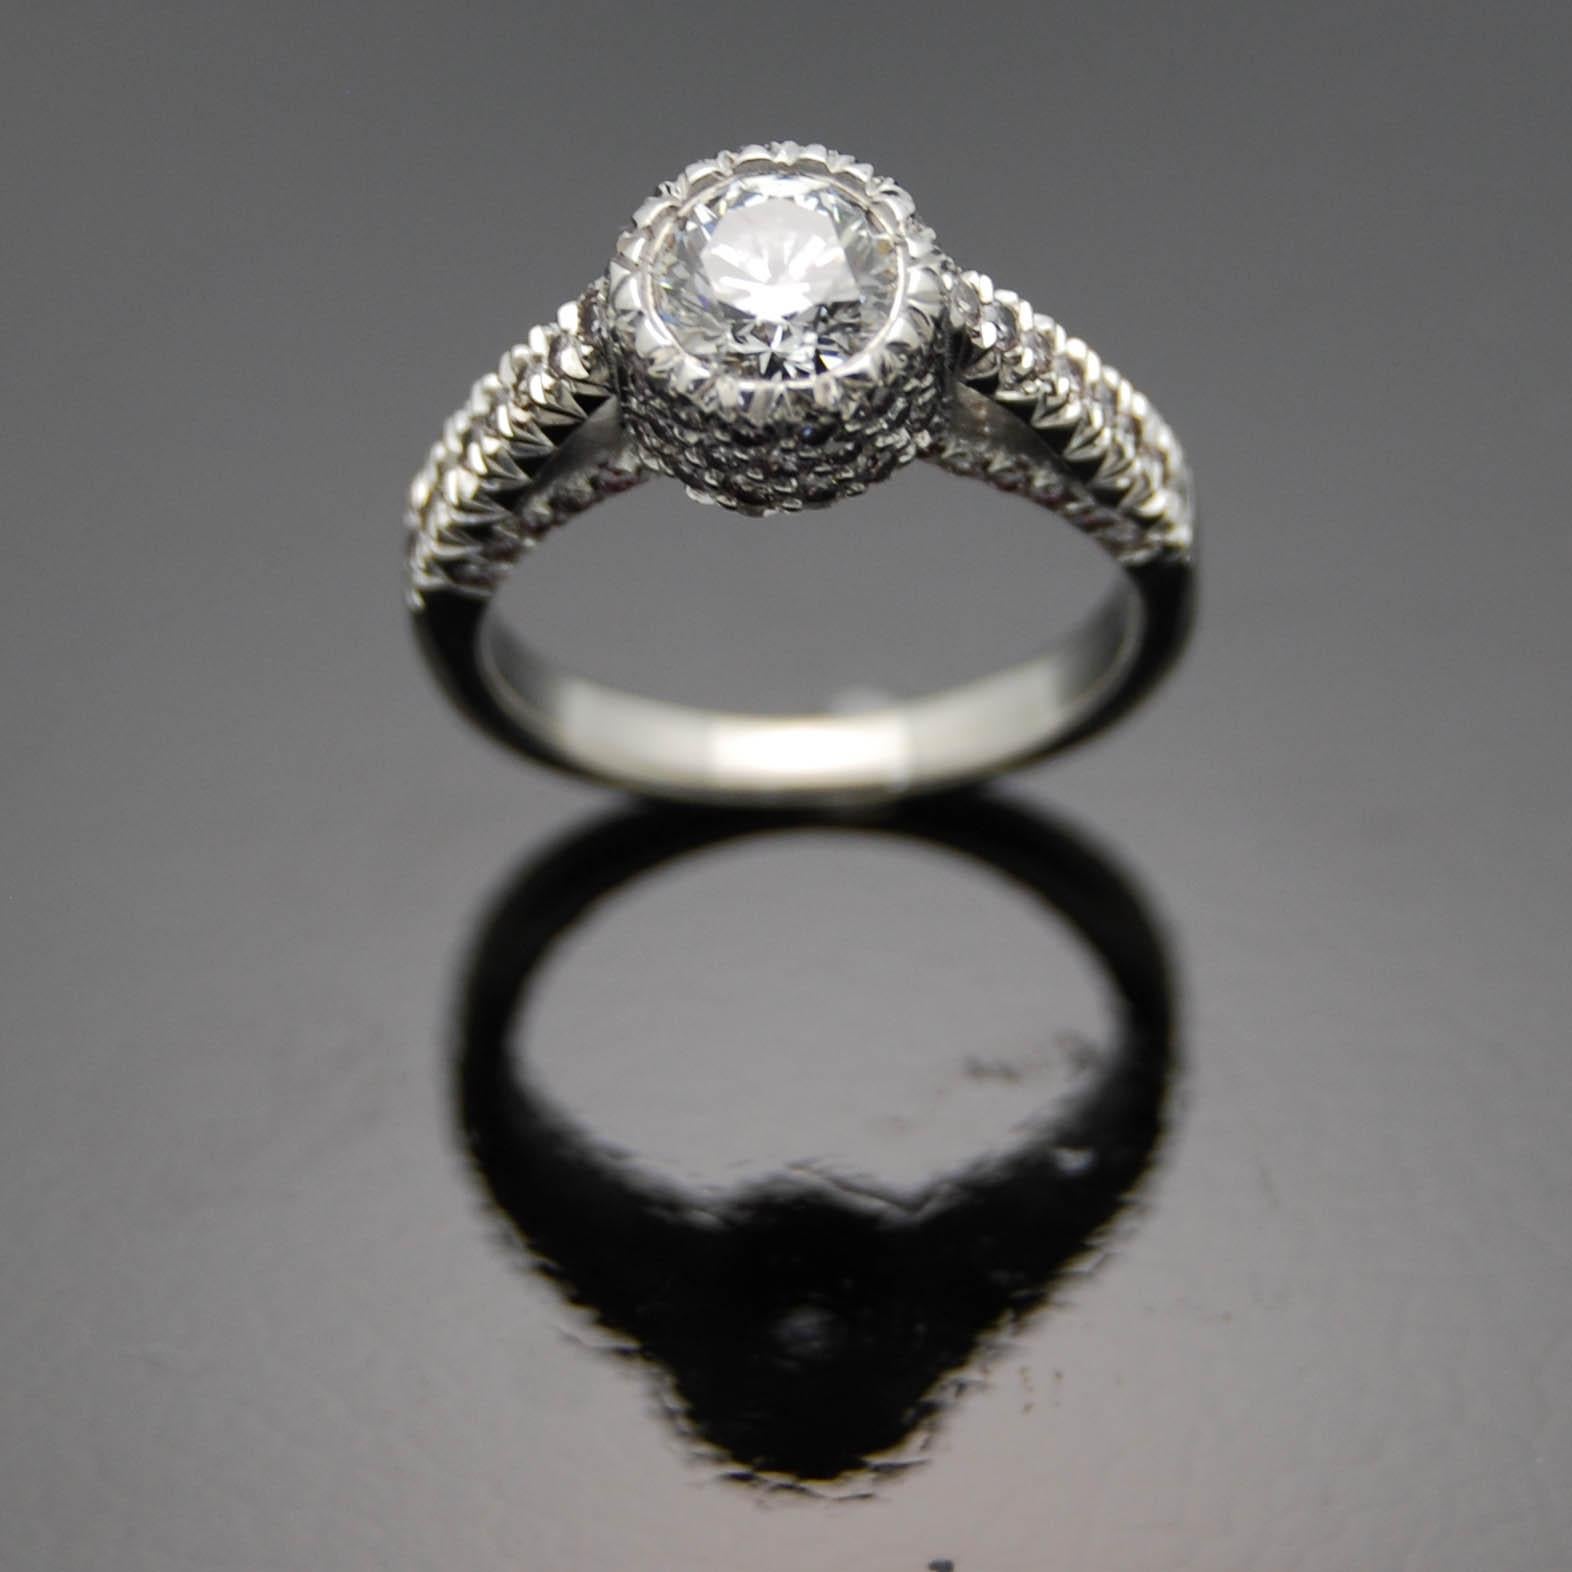 14kt White Gold Diamonds Ring. This design features a bezel set brilliant cut diamond with fine details, a raised setting and pink accent diamonds underneath.

This item is a custom order only. Price is for the ring setting only. The stone will be